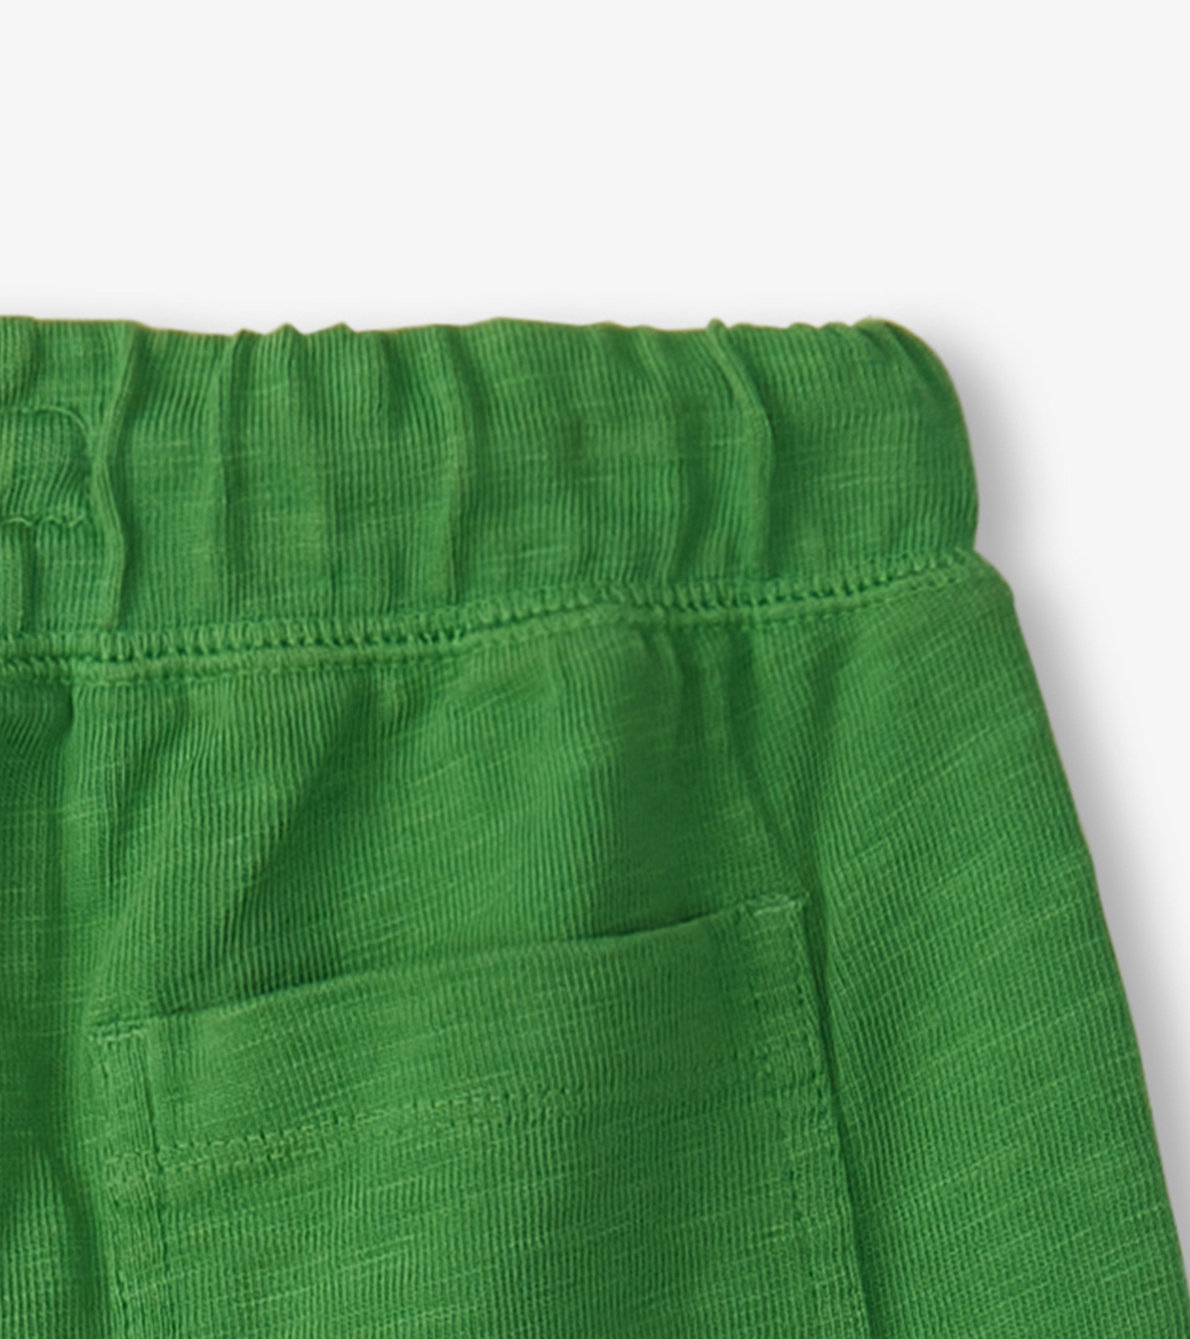 View larger image of Boys Camp Green Relaxed Shorts